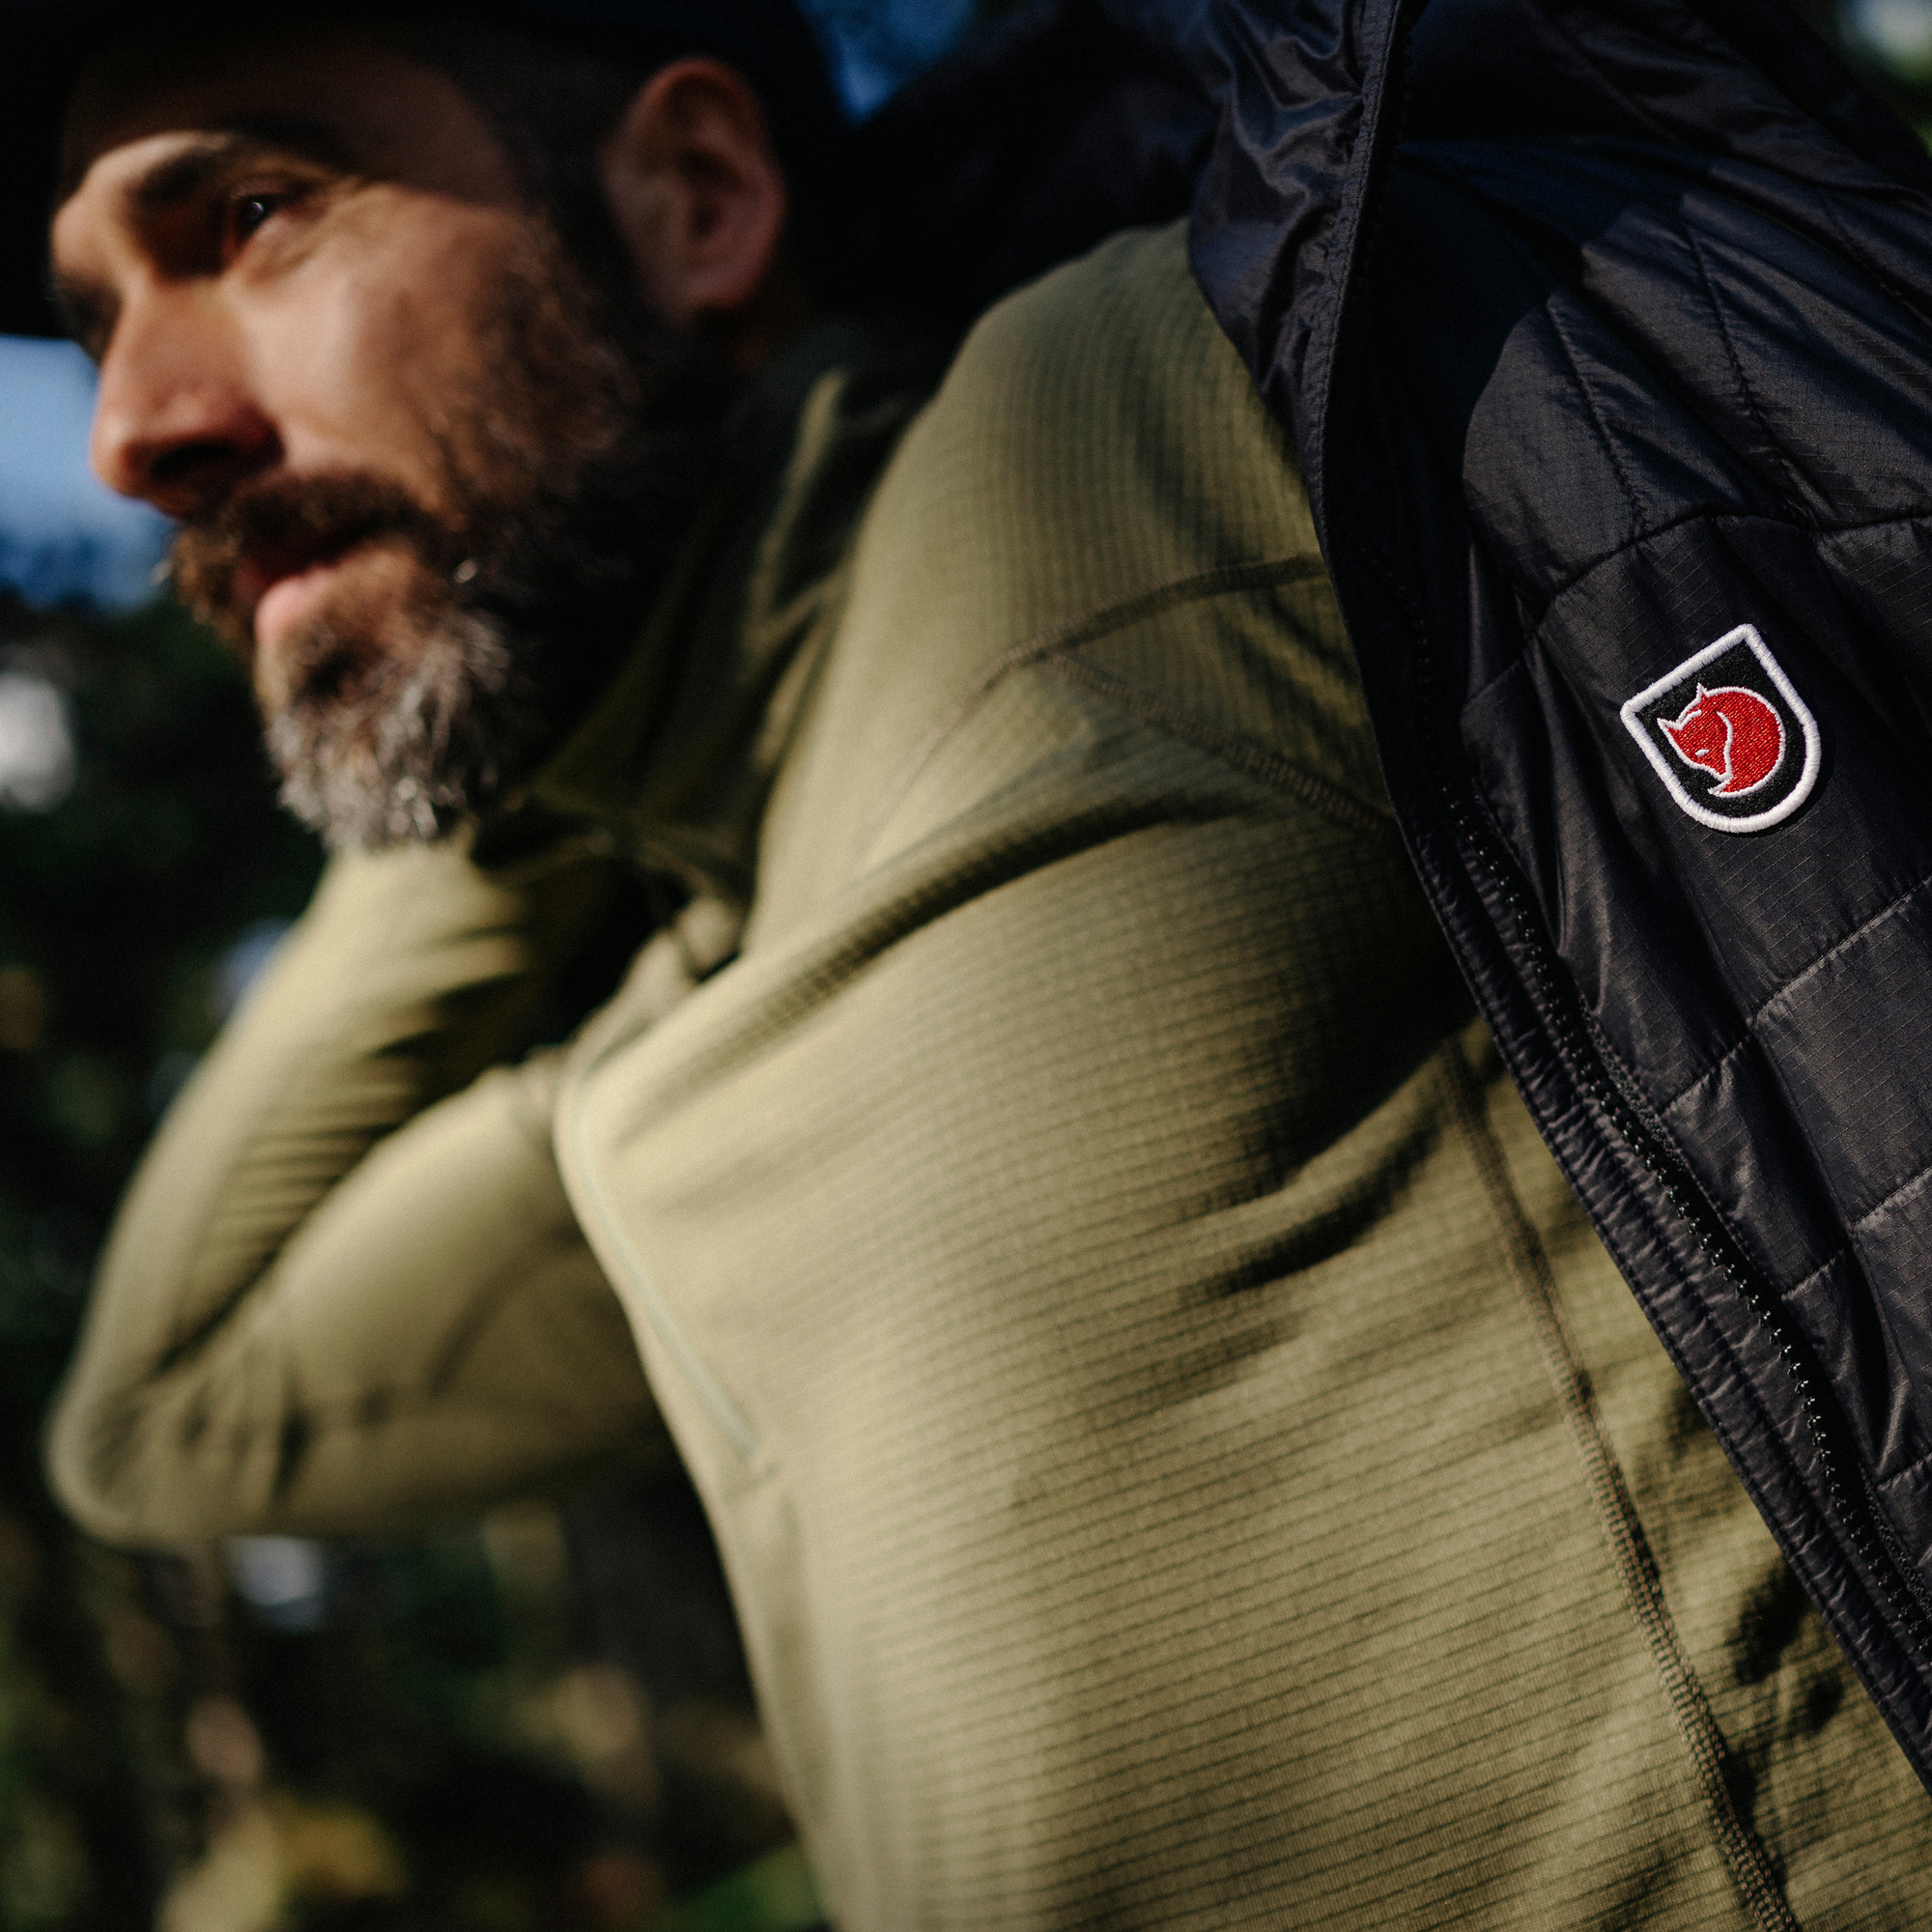 https://www.fjallraven.com/49ef42/globalassets/catalogs/fjallraven/f8/f871/f87199/features/square_mood_ss23_silvanozeiter_midlayers_2354_exp_2028-02-01.jpg?width=2000&height=2000&mode=BoxPad&bgcolor=fff&quality=100